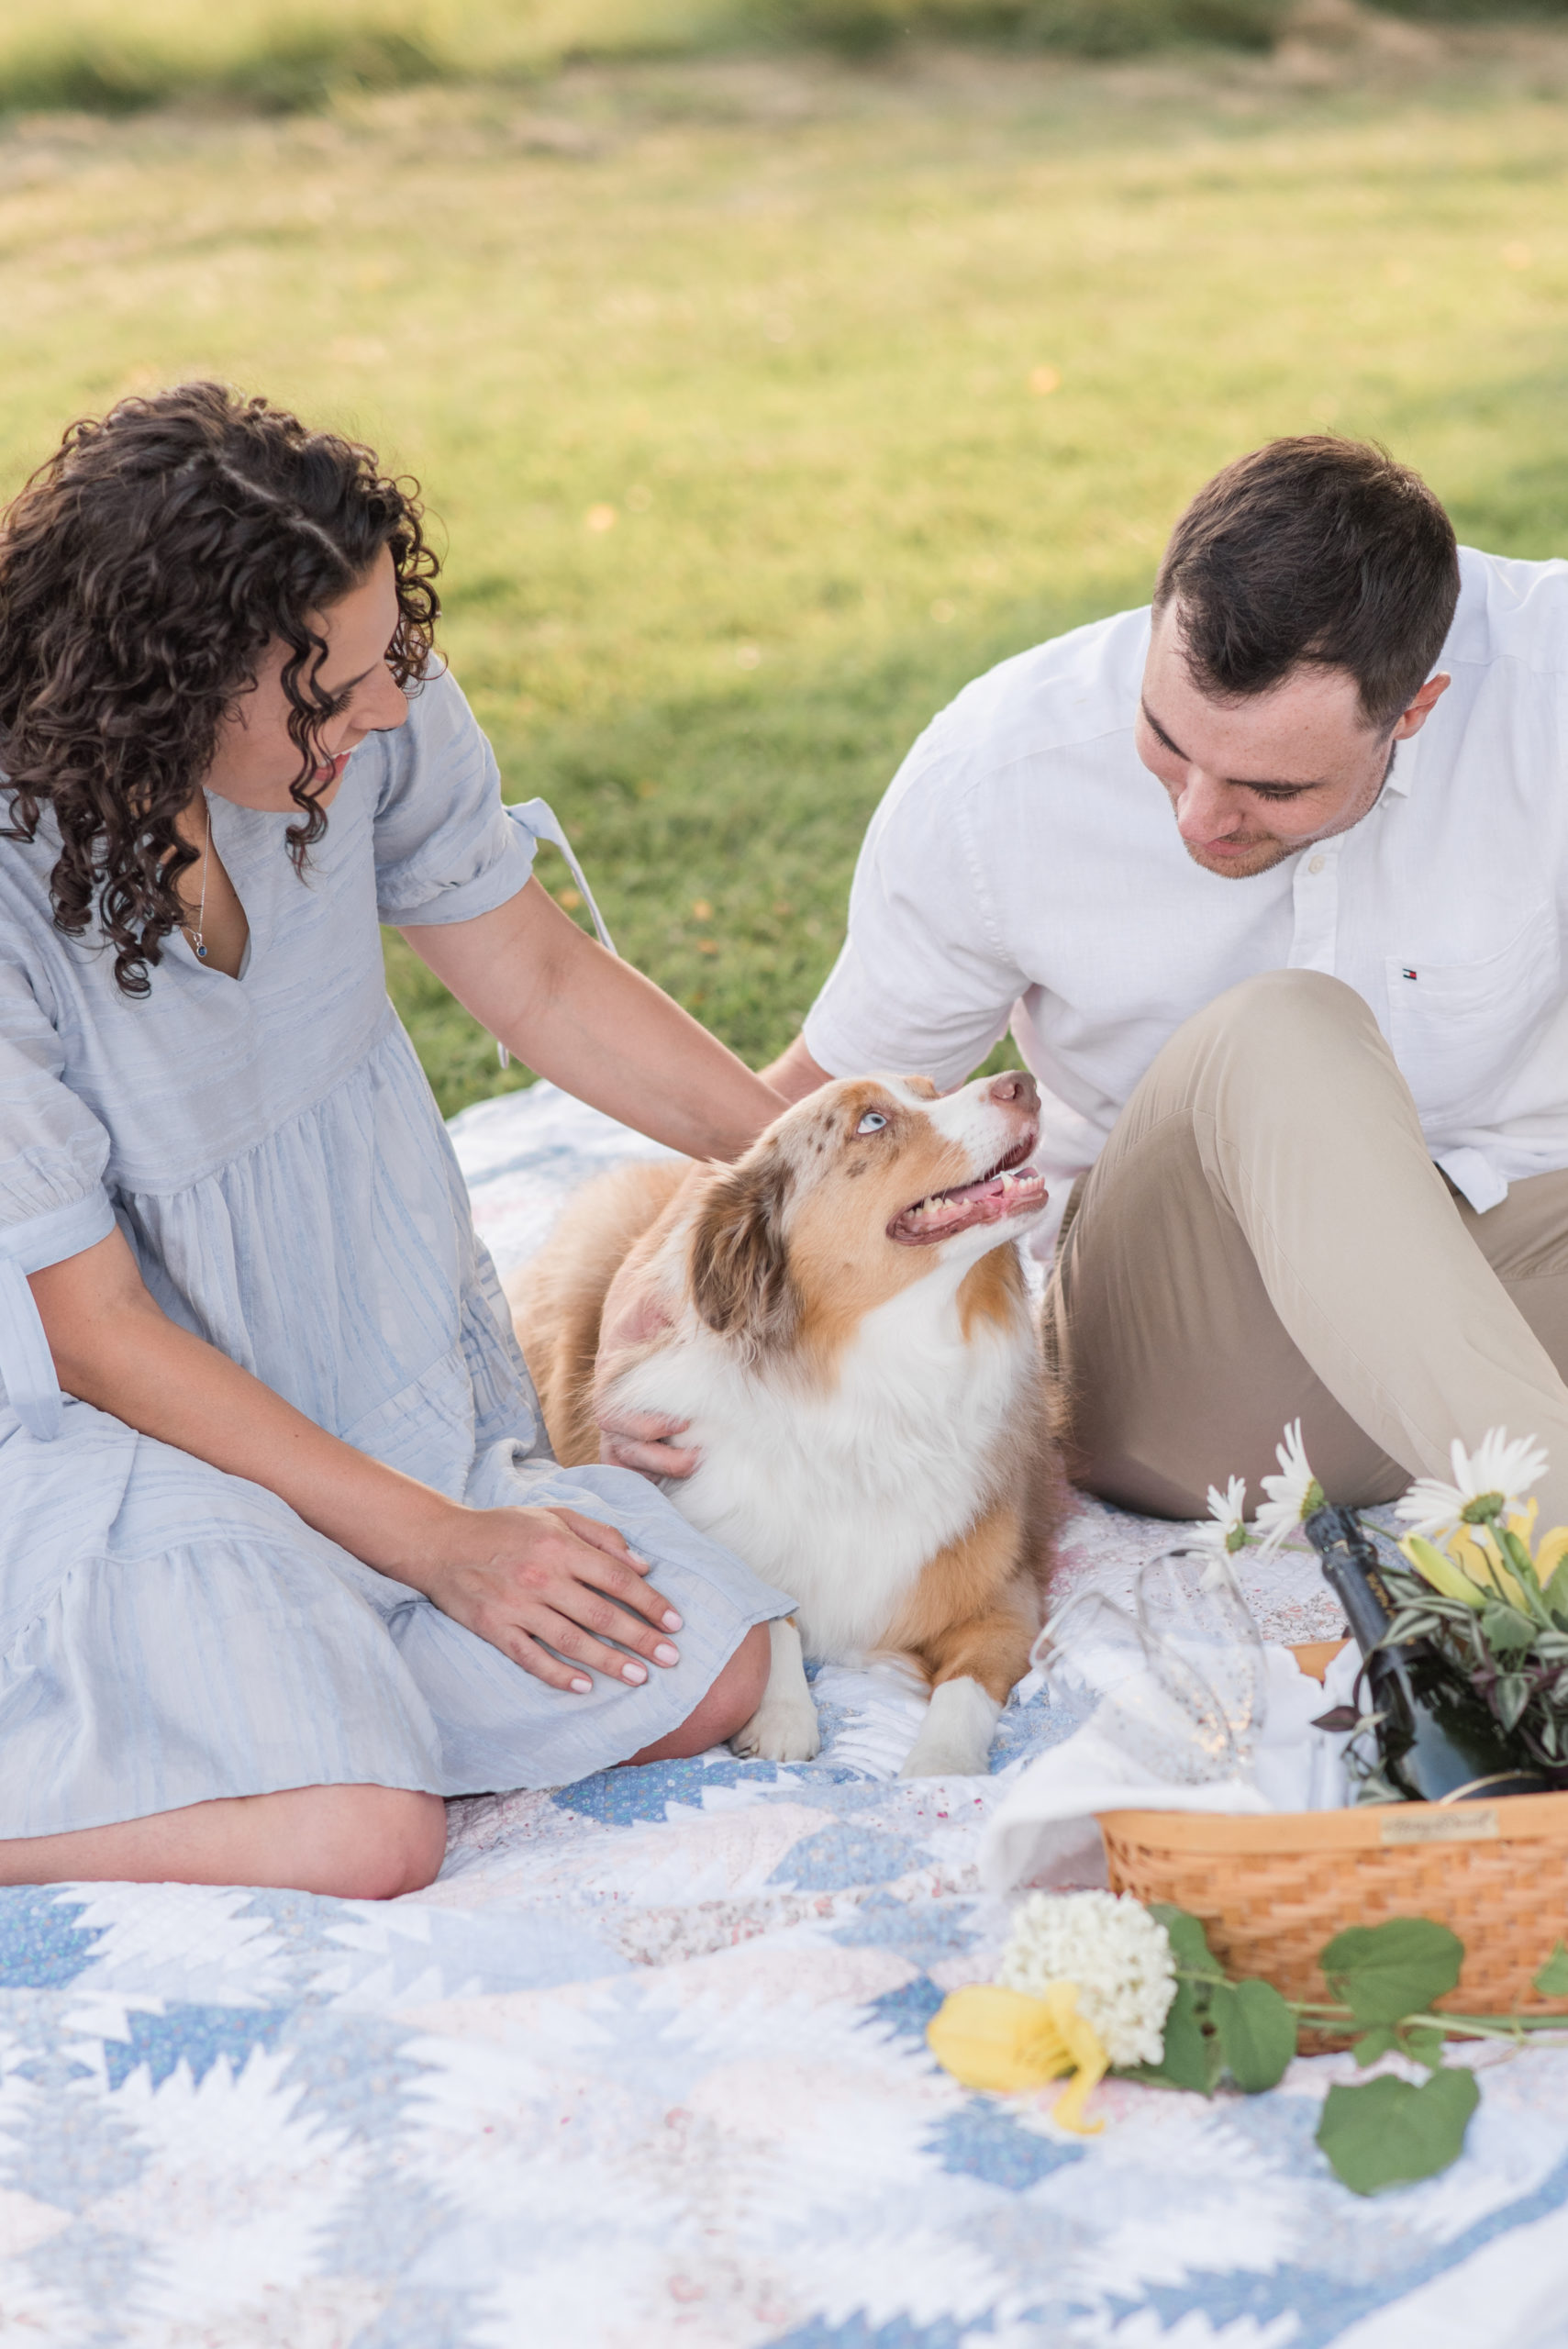 Dogs in Weddings How to include your dog in your wedding by Courtney Rudicel Wedding Photographer in Indiana